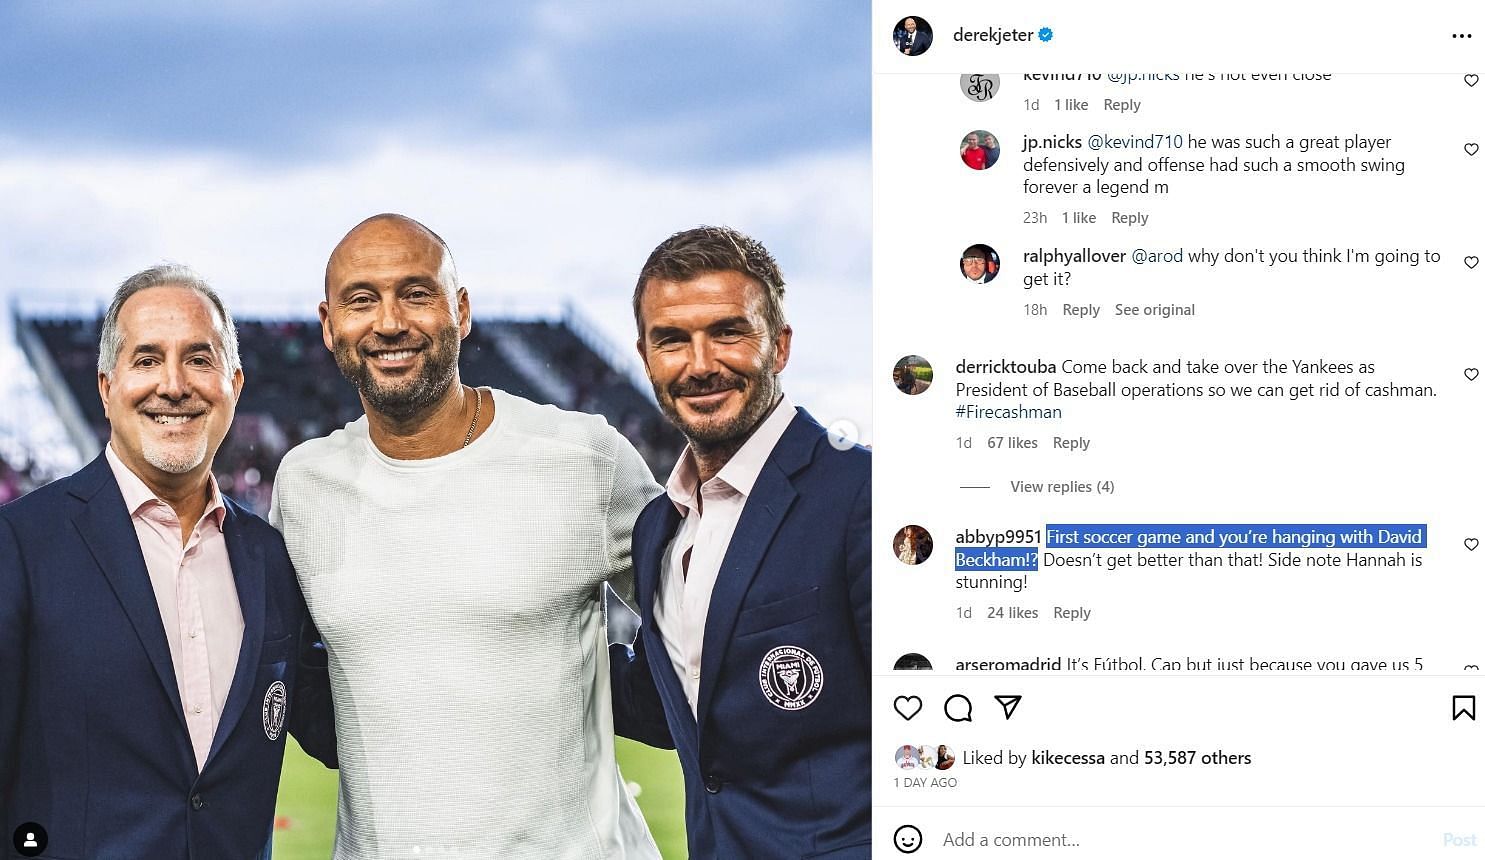 Fans were in awe of Derek Jeter being at his first soccer game